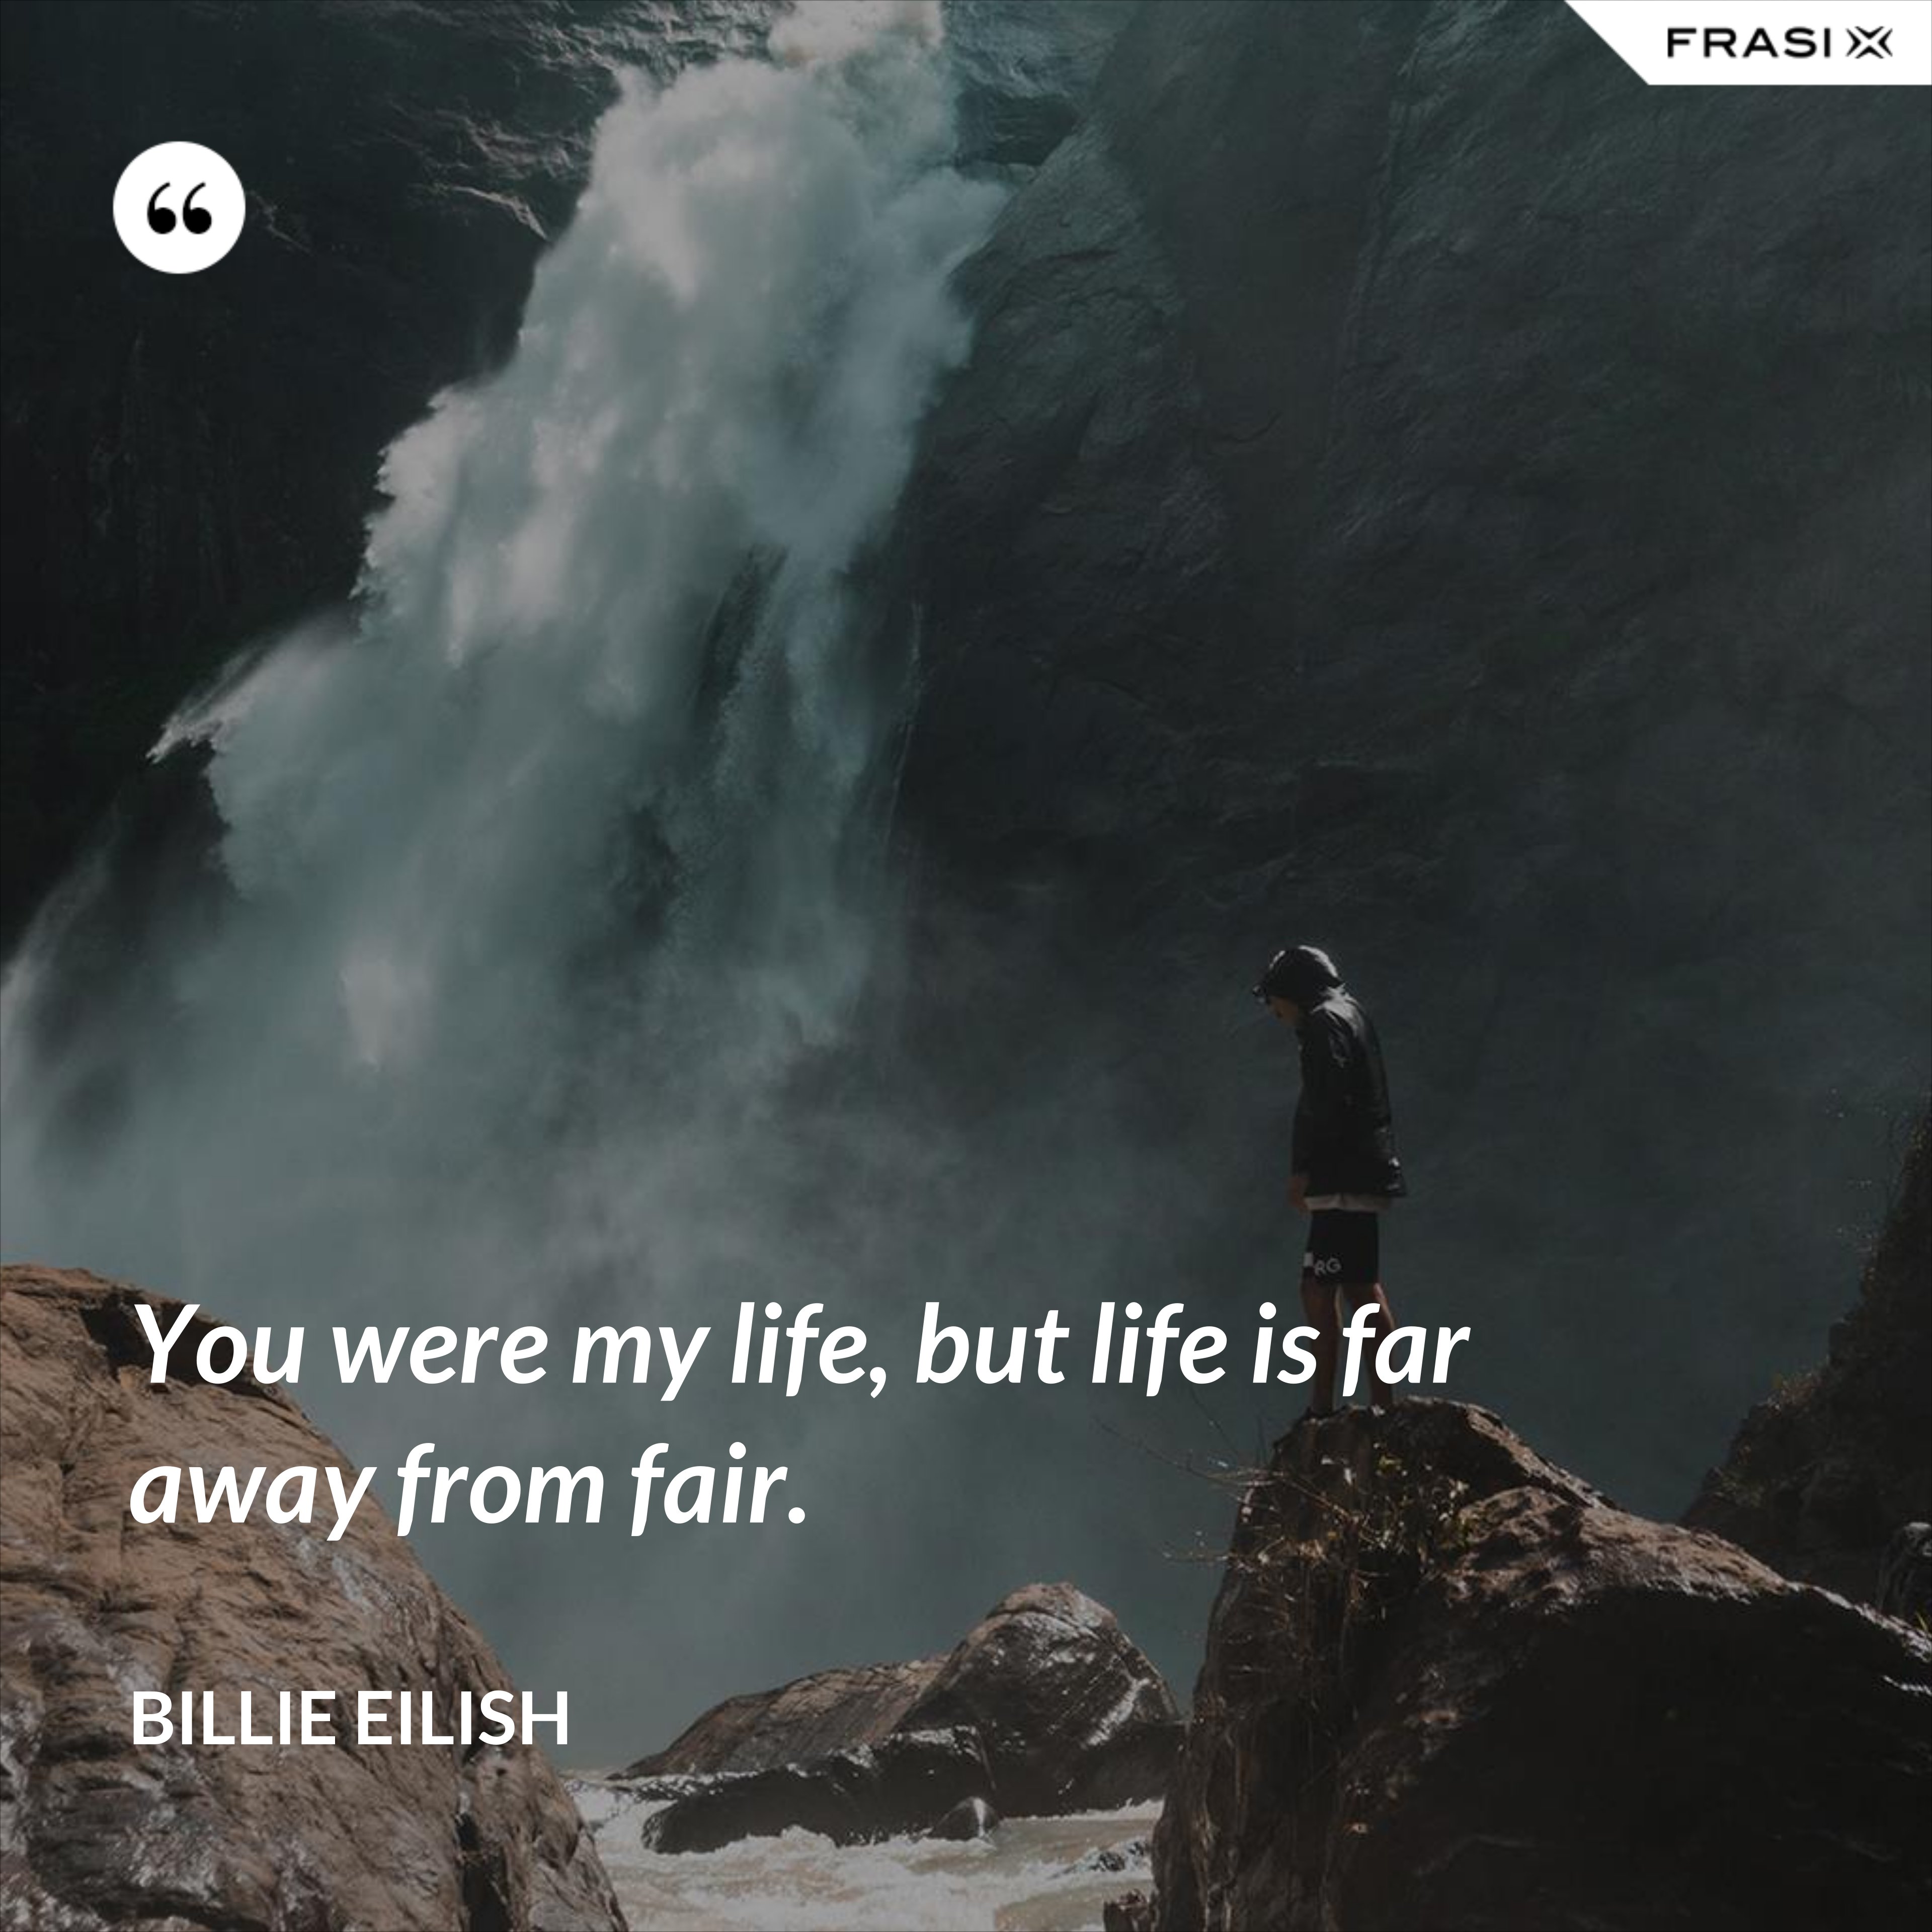 You were my life, but life is far away from fair. - Billie Eilish